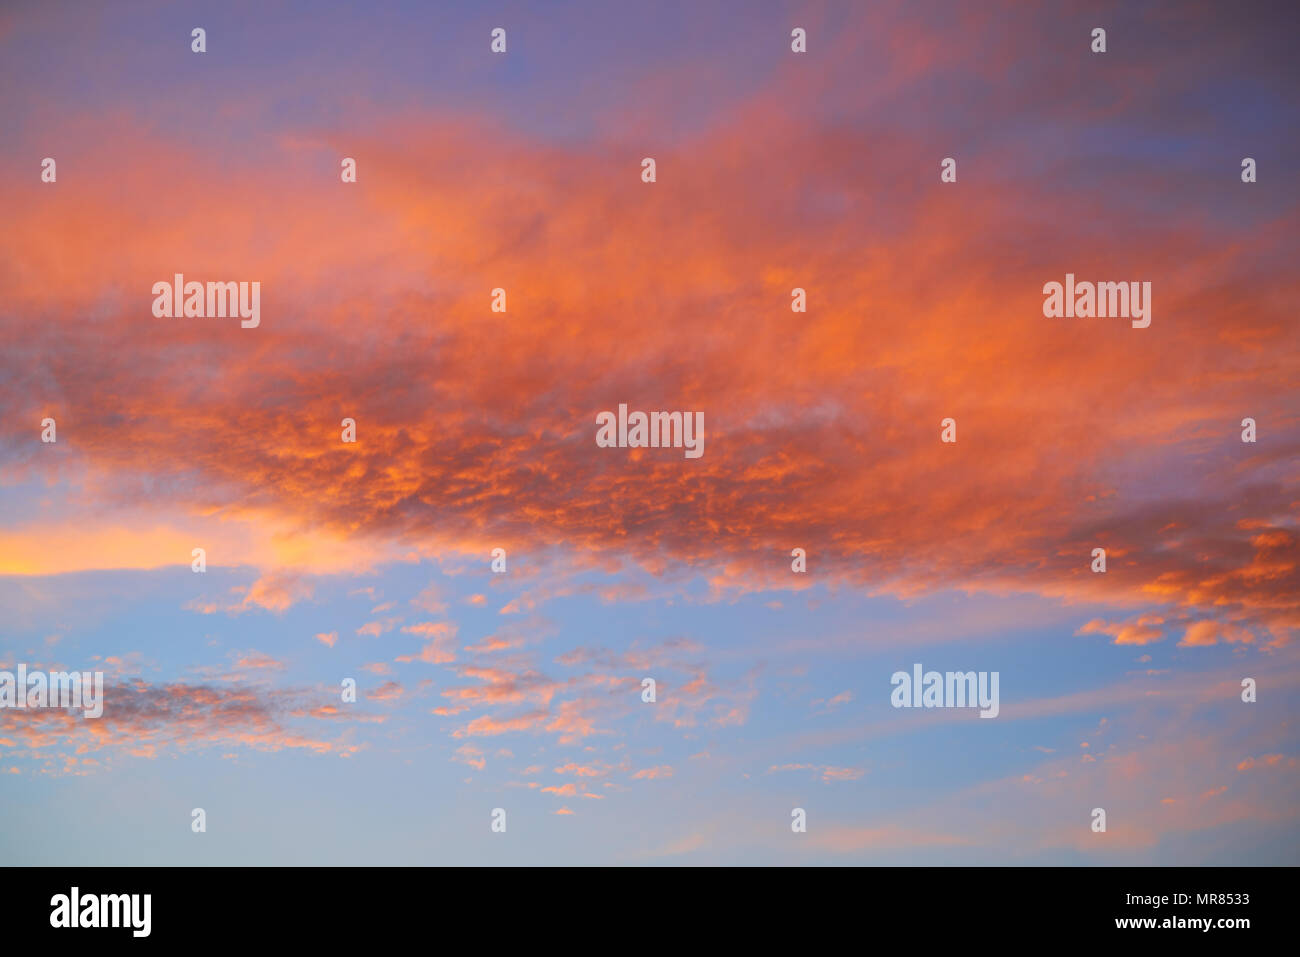 Sunset sky with orange clouds and blue background skies Stock Photo